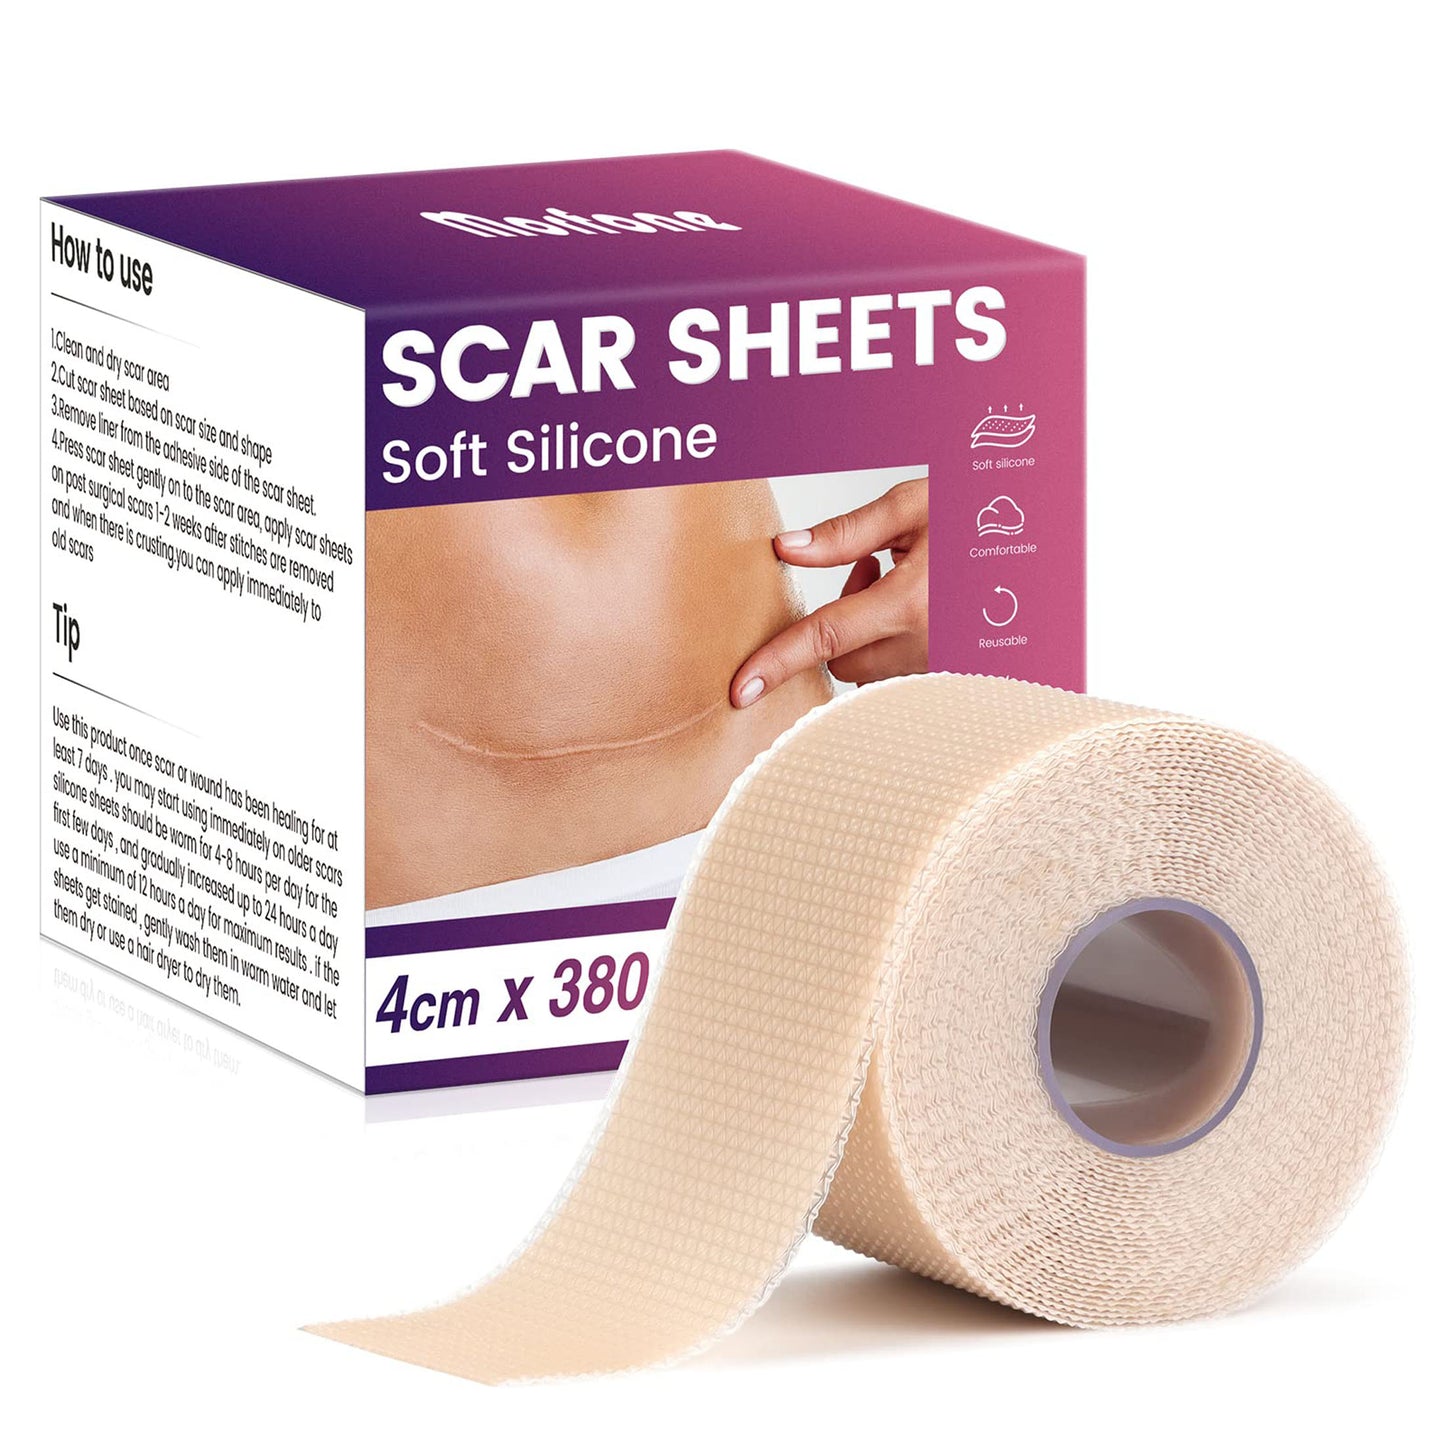 Silicone Scar Sheets (1.6” x 150” Roll-3.8M), Morfone Silicone Scar Tape